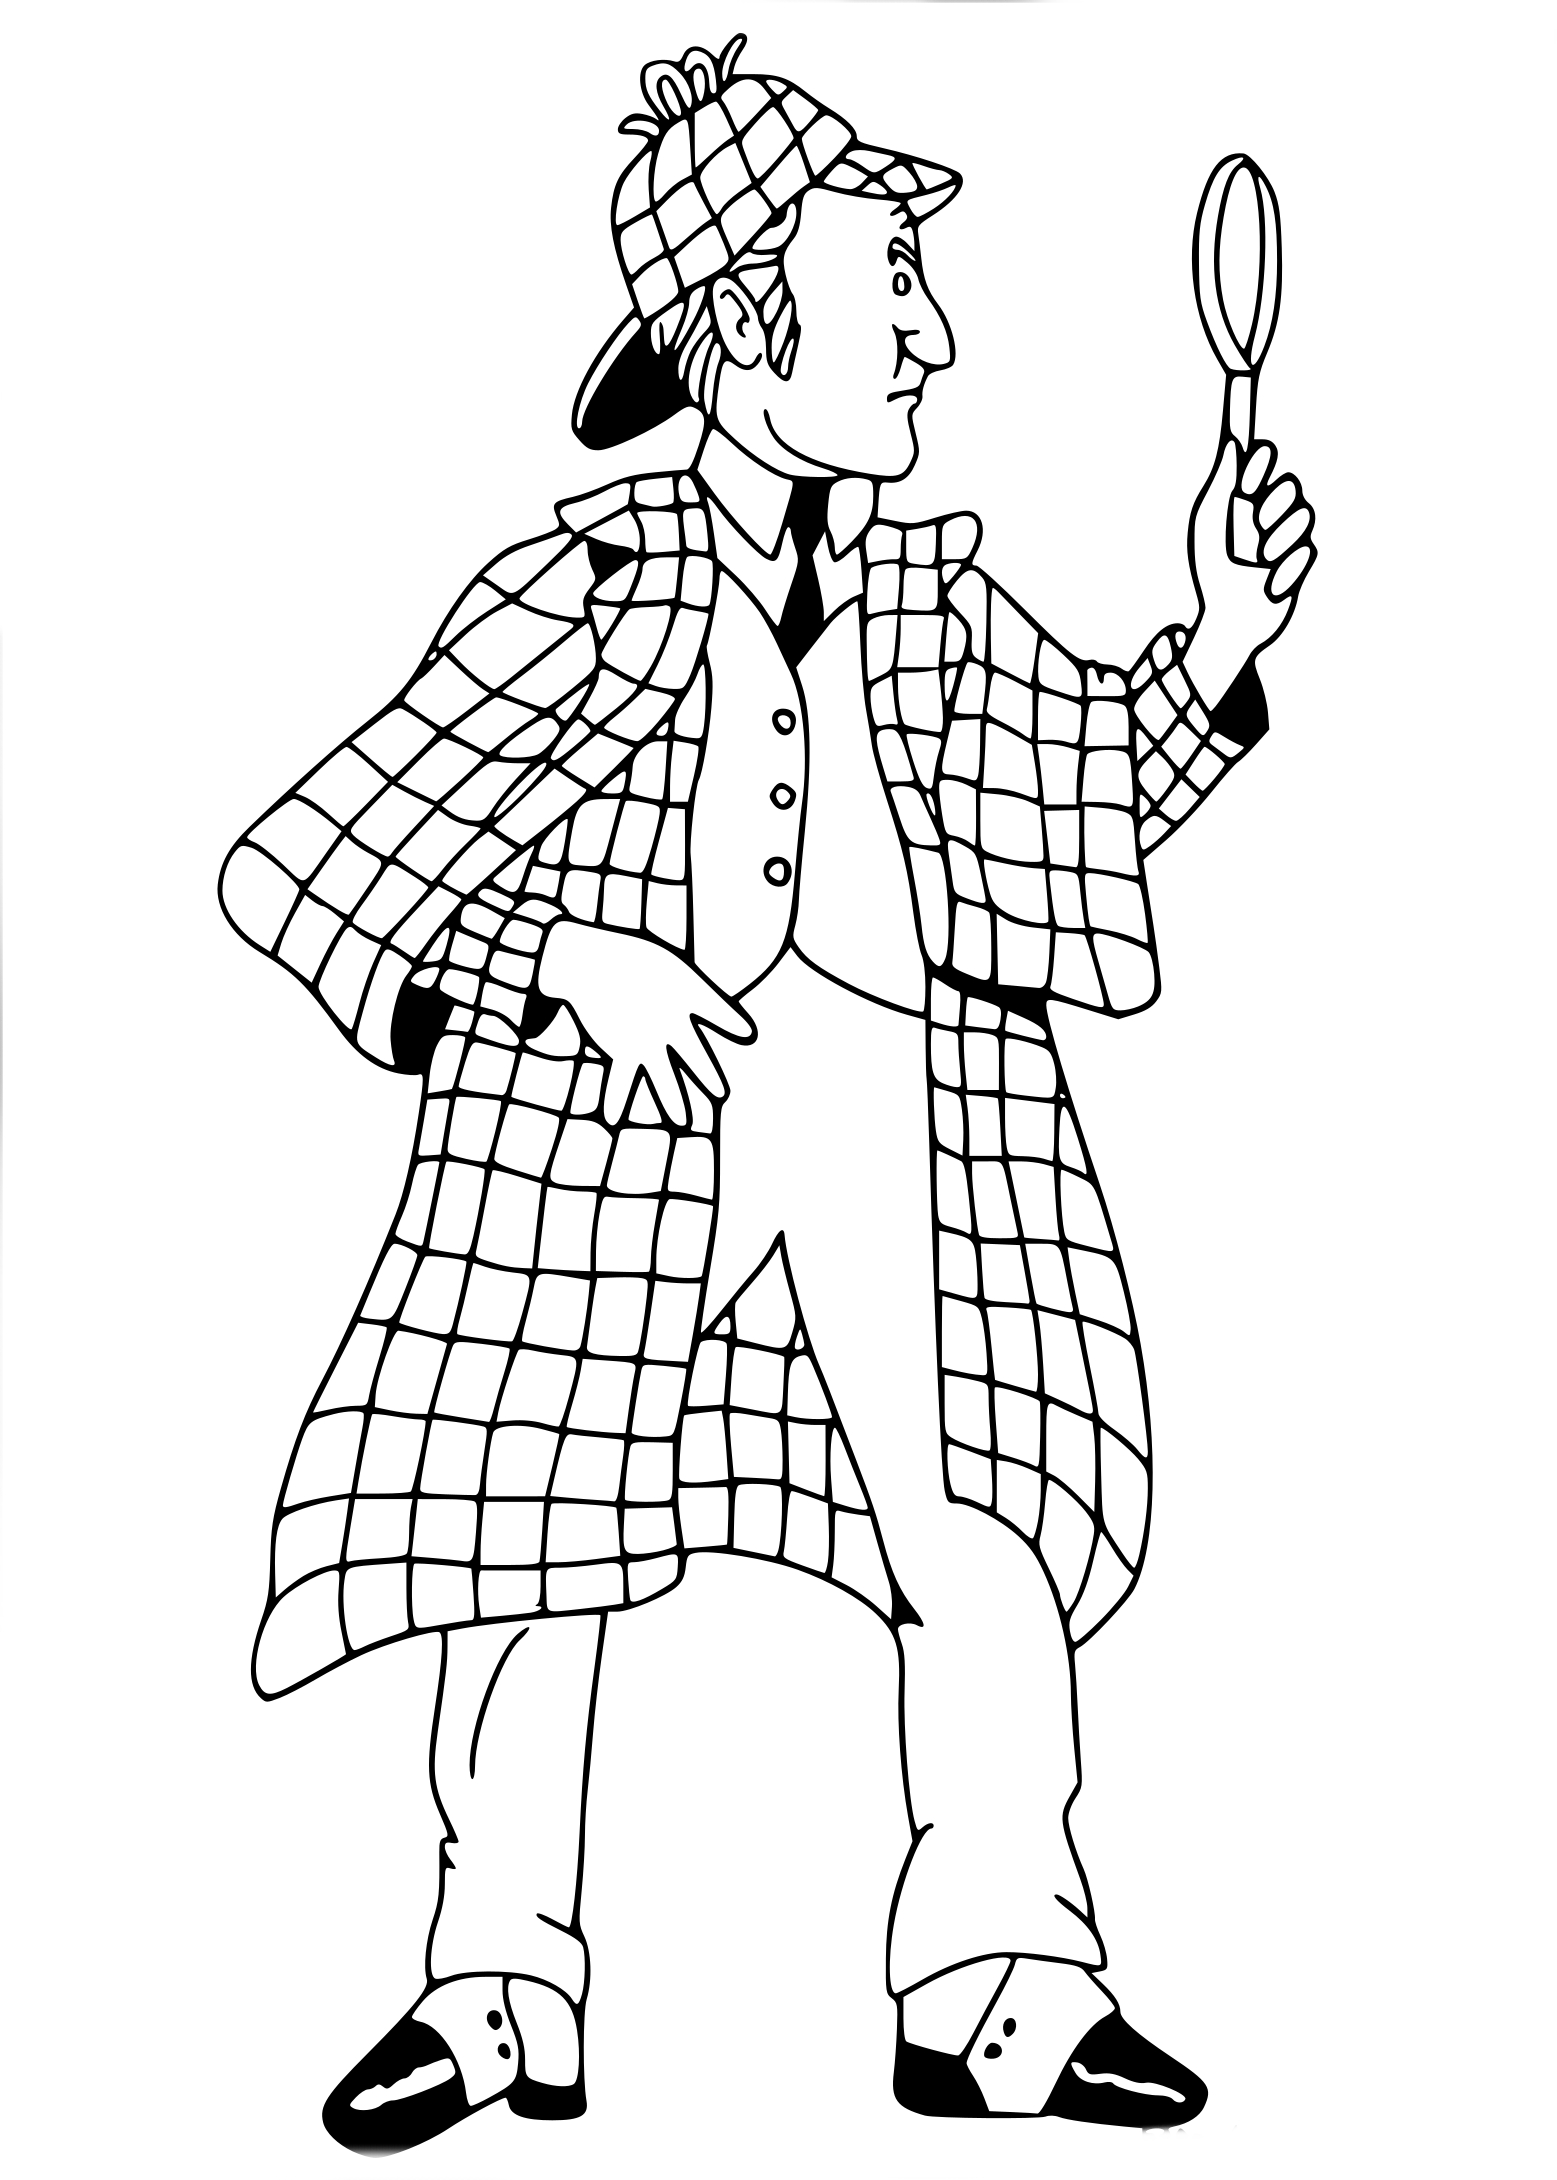 Sherlock Holmes coloring page - free printable coloring pages on coloori.com